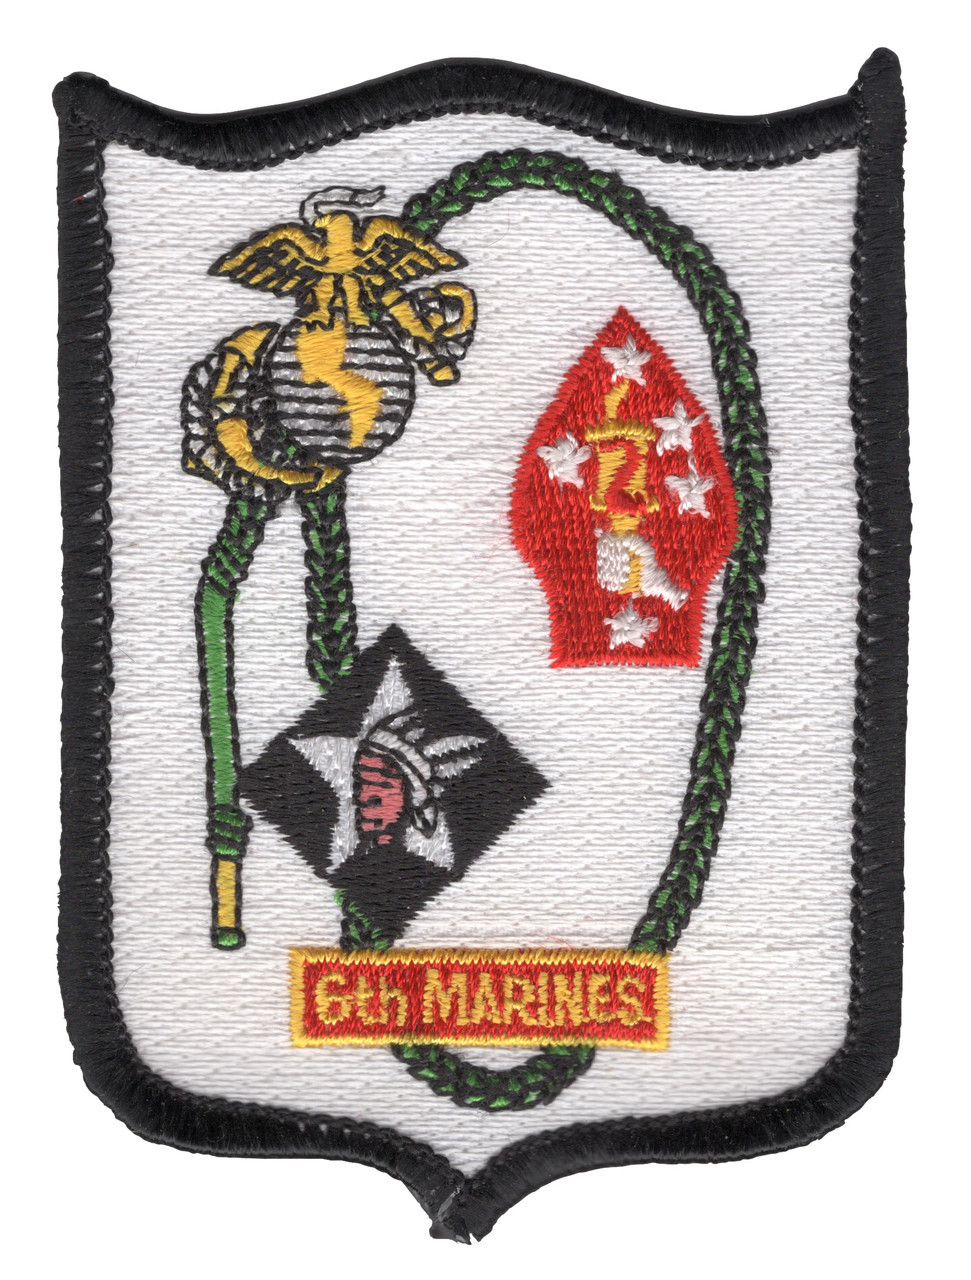 U.S. Marines Veteran - Embroidered Iron-On Patch